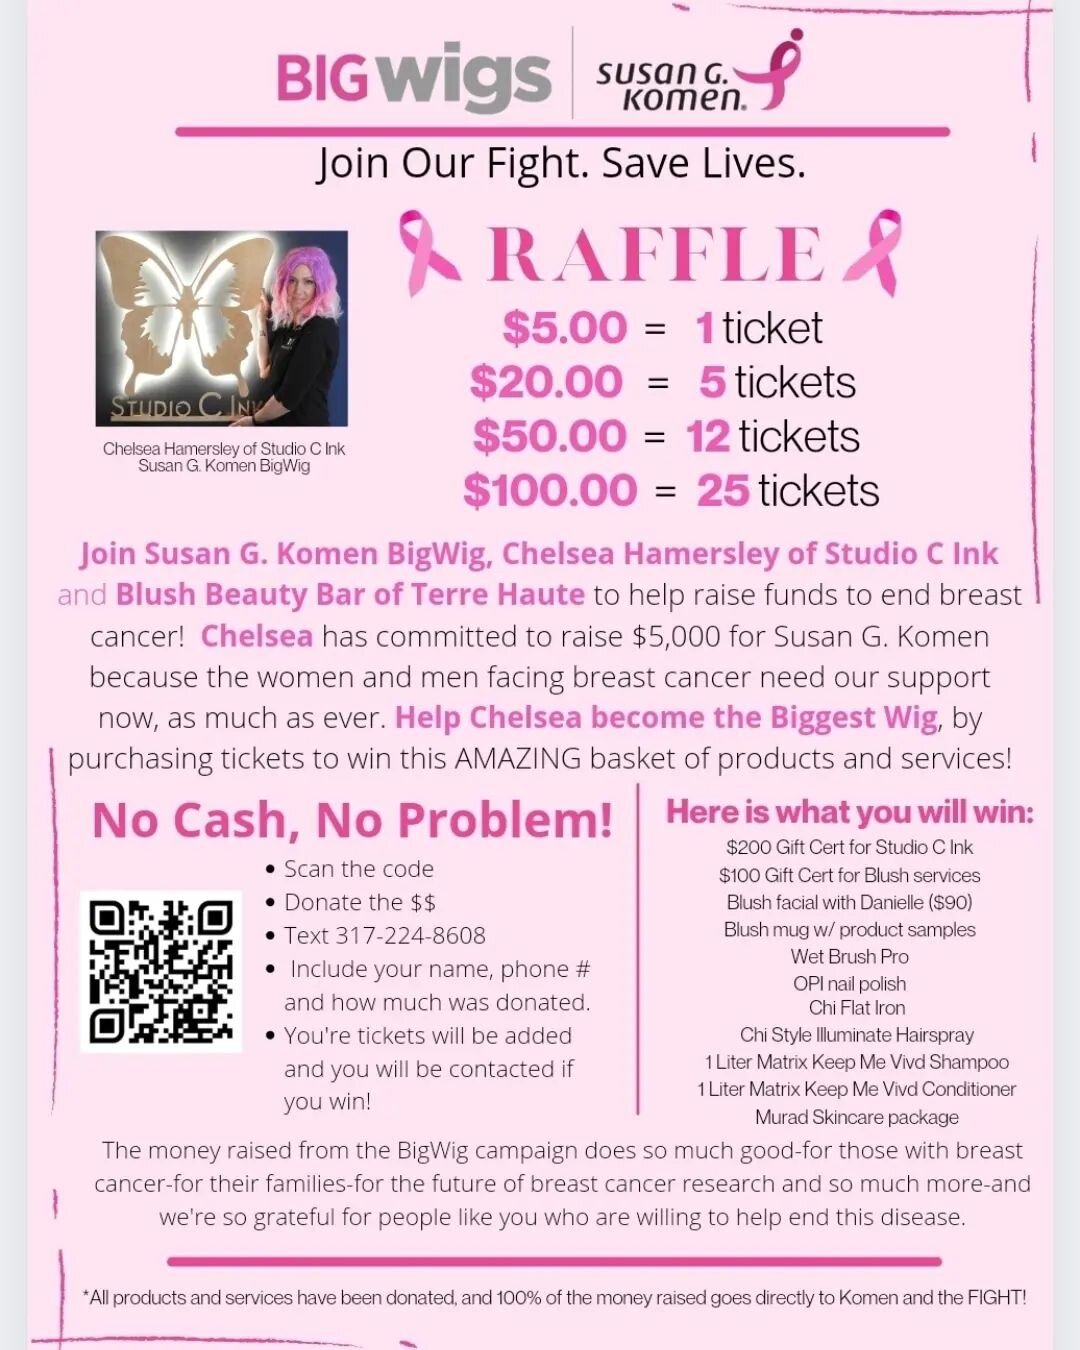 HEY EVERYONE!!! We are wigging out for Komen!  I am a Big Wig and we have an AMAZING opportunity for you!  Raising money for Susan G. Komen and the fight against breast cancer! Here are the deets!
1 ticket=$5
5 tickets=$20
12 tickets=$50
25 ticket=$1